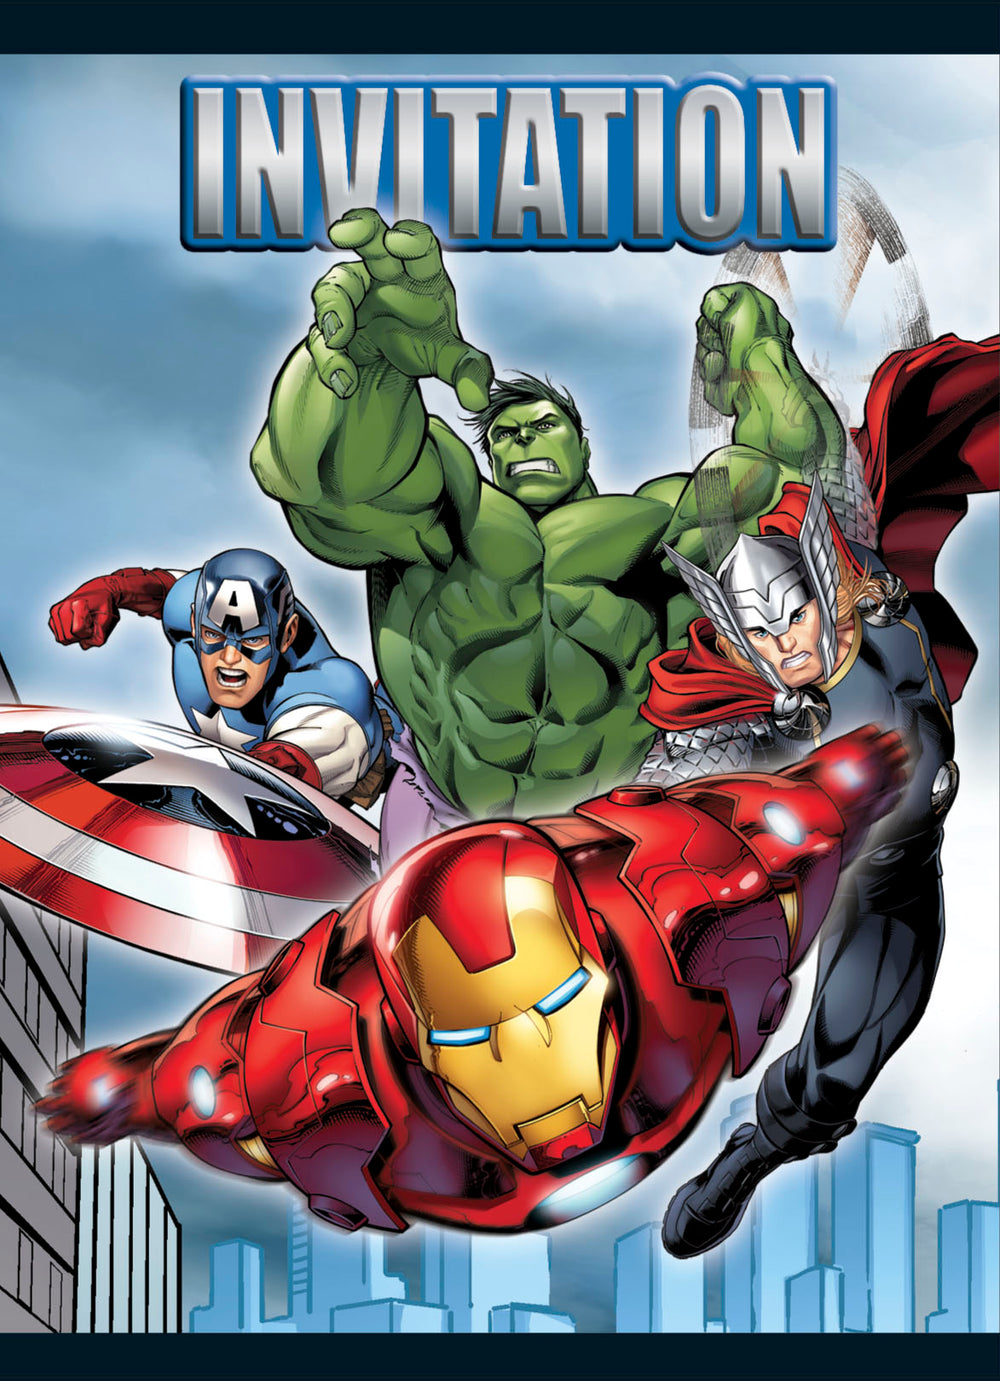 Avengers invitations 8 count featuring thor, iron man, captain america and the hulk